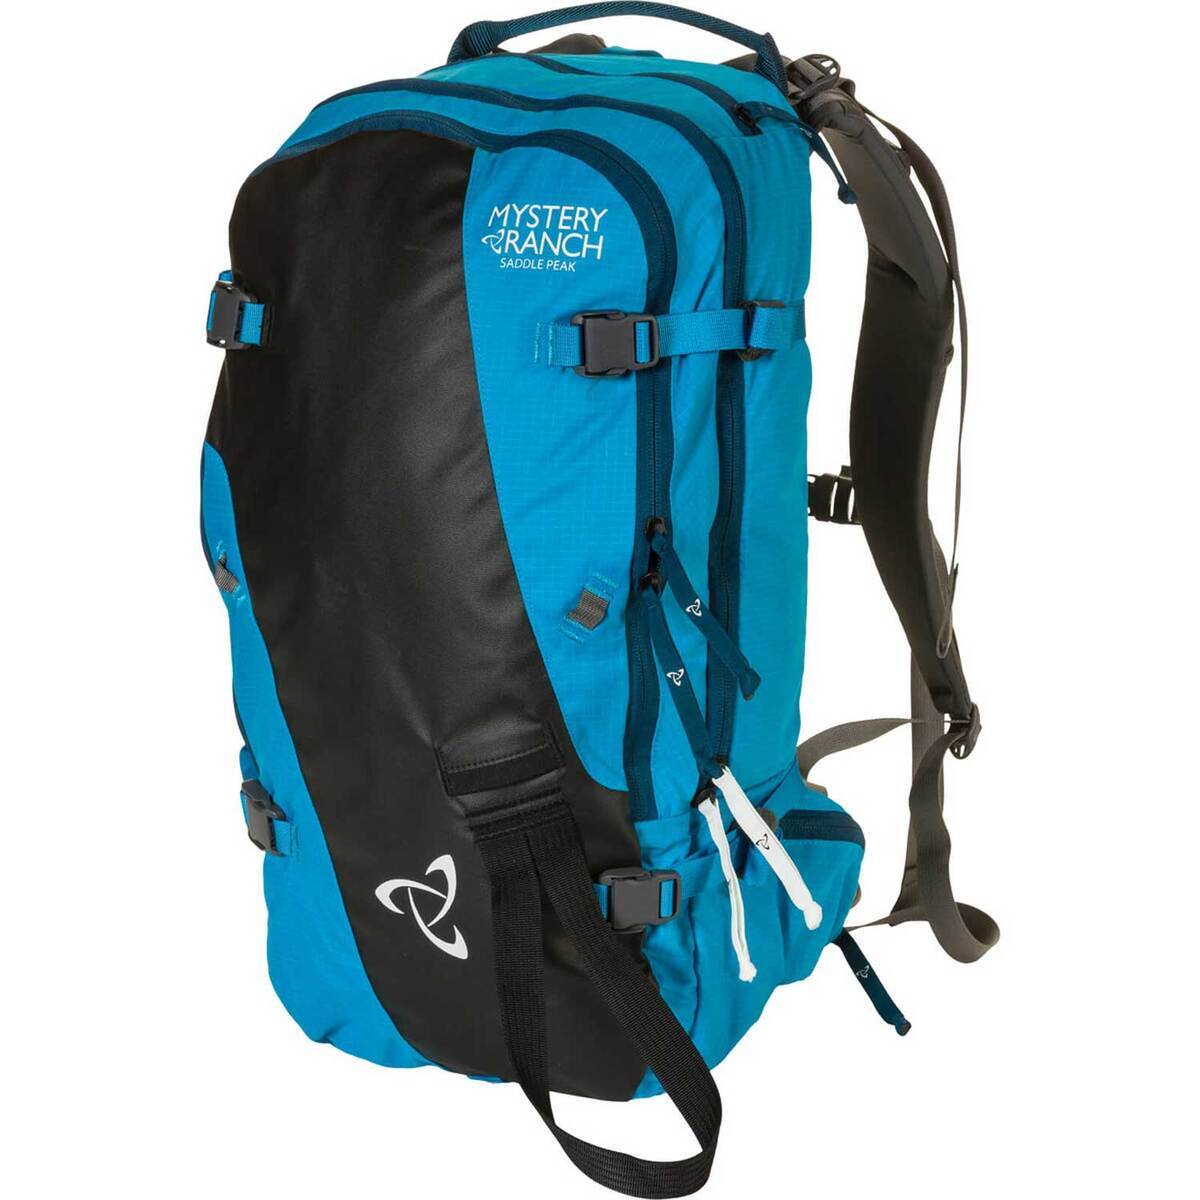 daypack - father's day gifts for sports lover